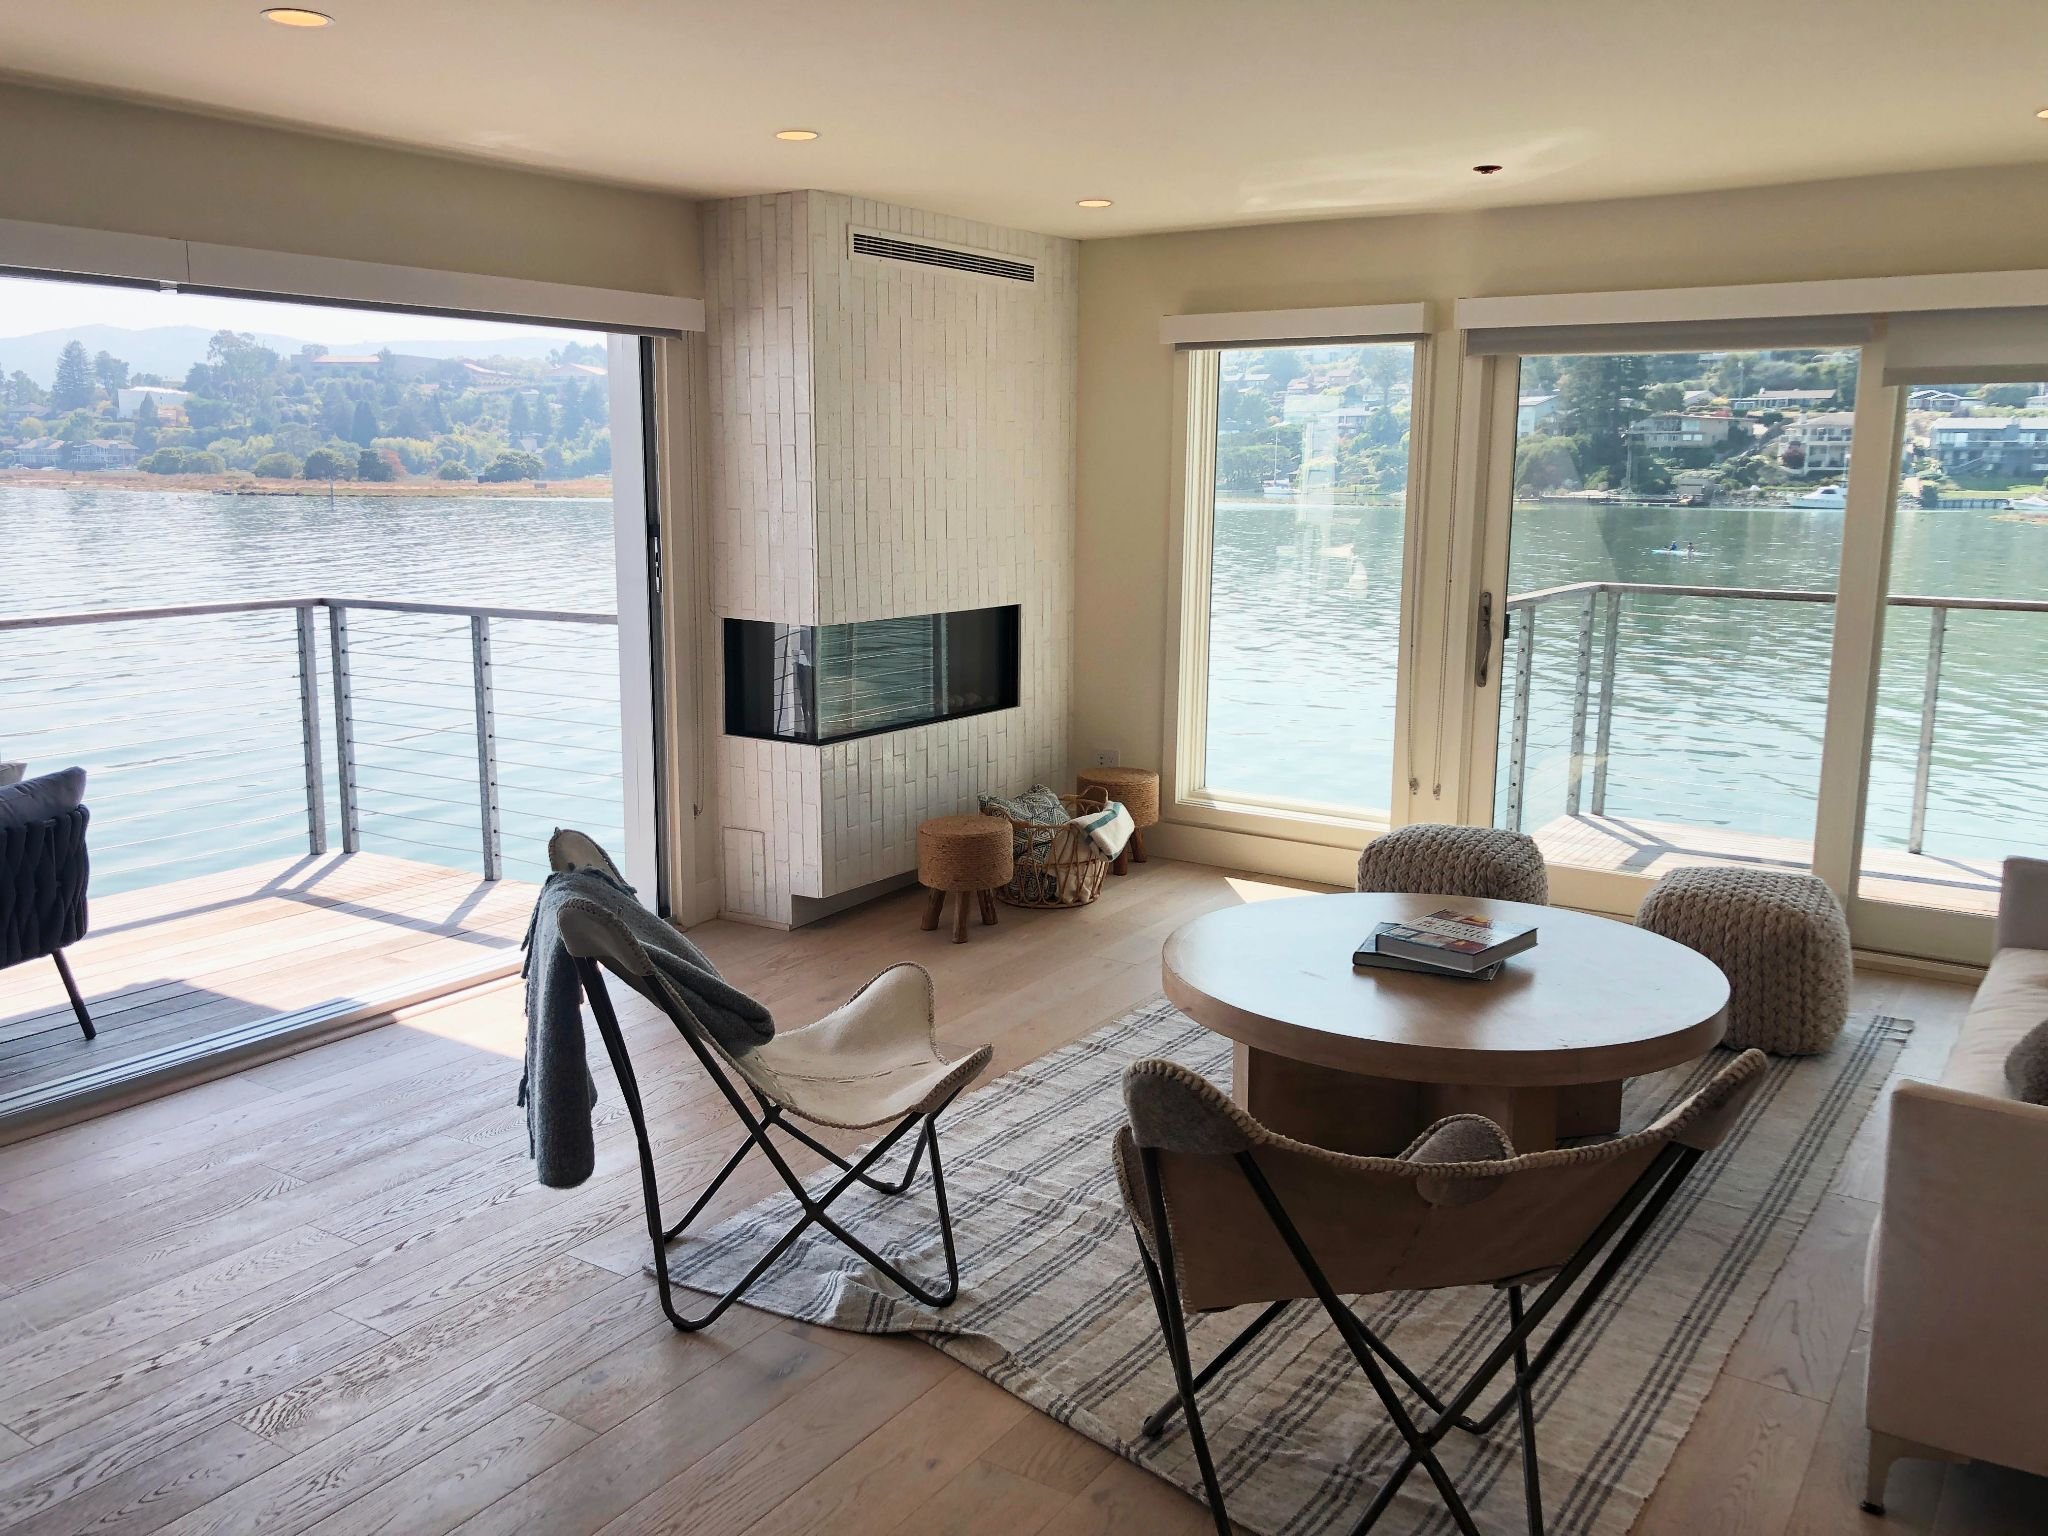 The perfect staycation, complete with a cooling waterfront breeze. #TheCoveAtTiburon
-
-
-
-
-
-
#tiburon #tiburonrents #tiburonapartment #cali #california #caliliving #calidreaming #waterfront #waterfronthome #pinterestinspired